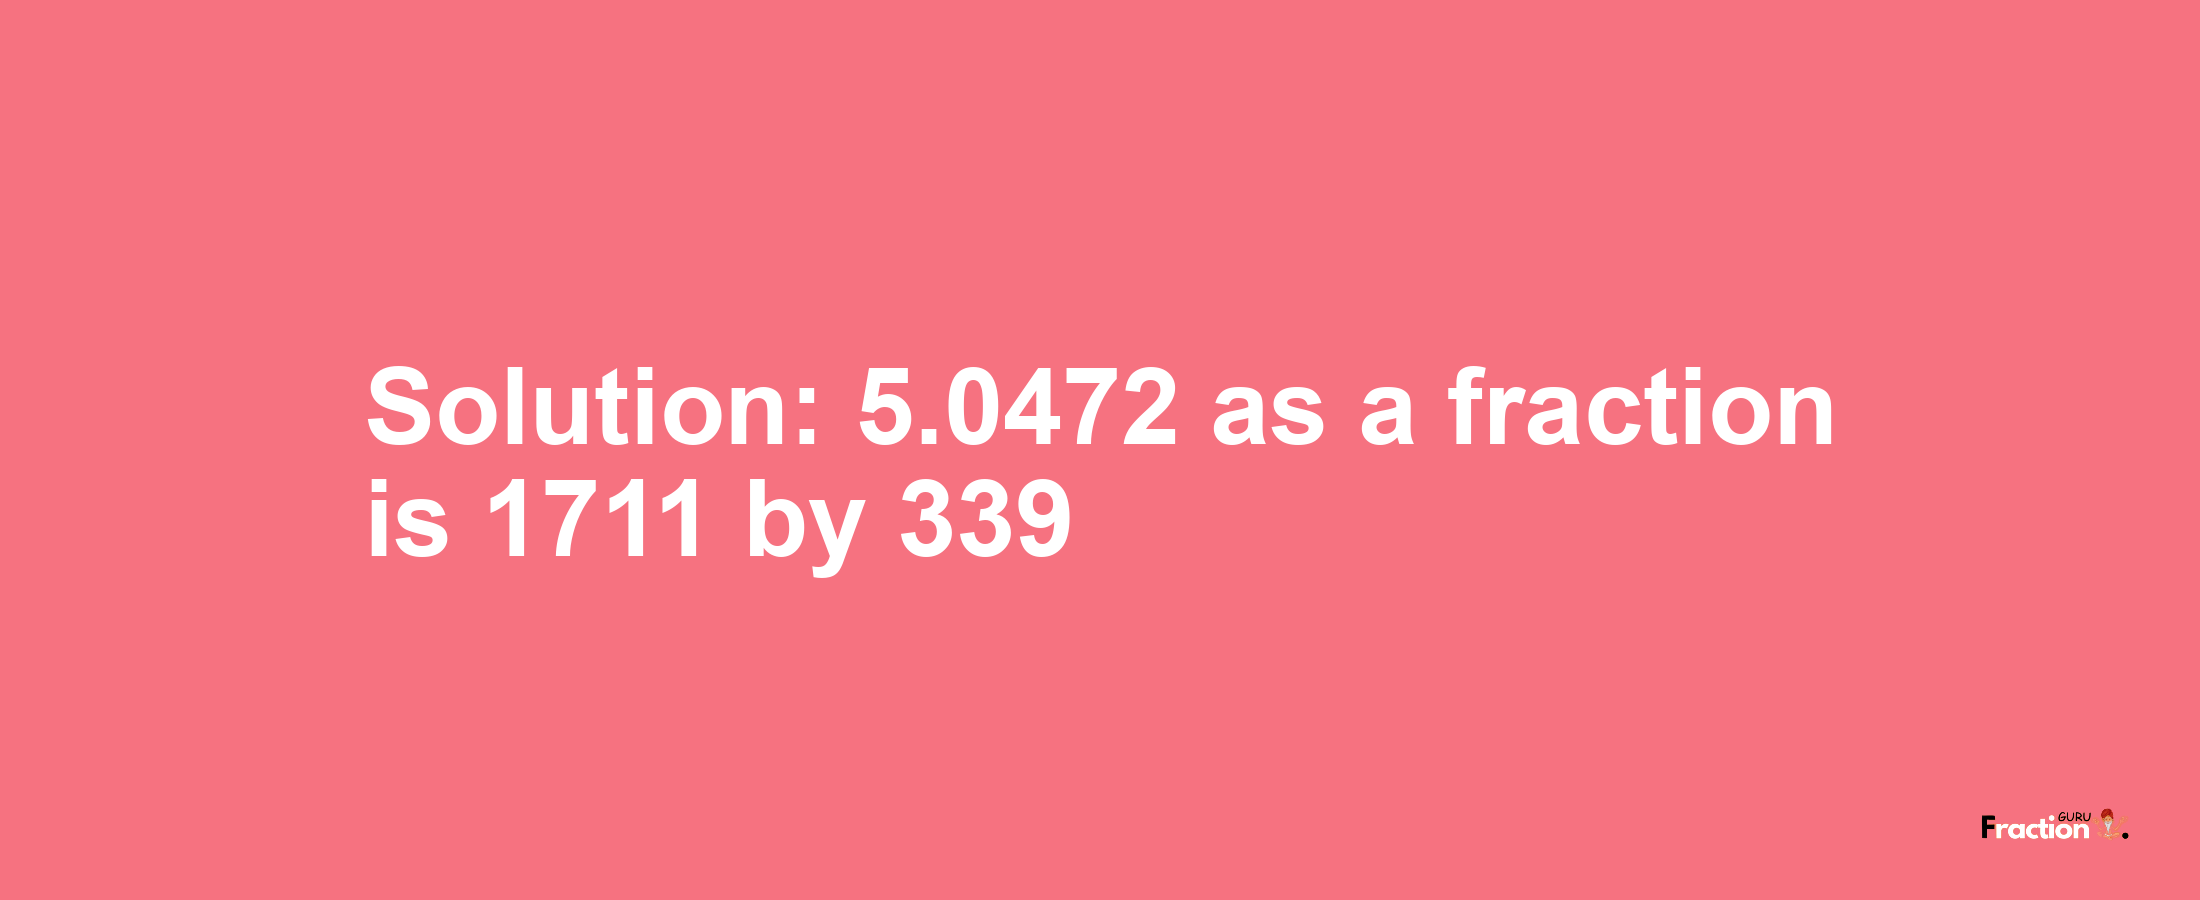 Solution:5.0472 as a fraction is 1711/339